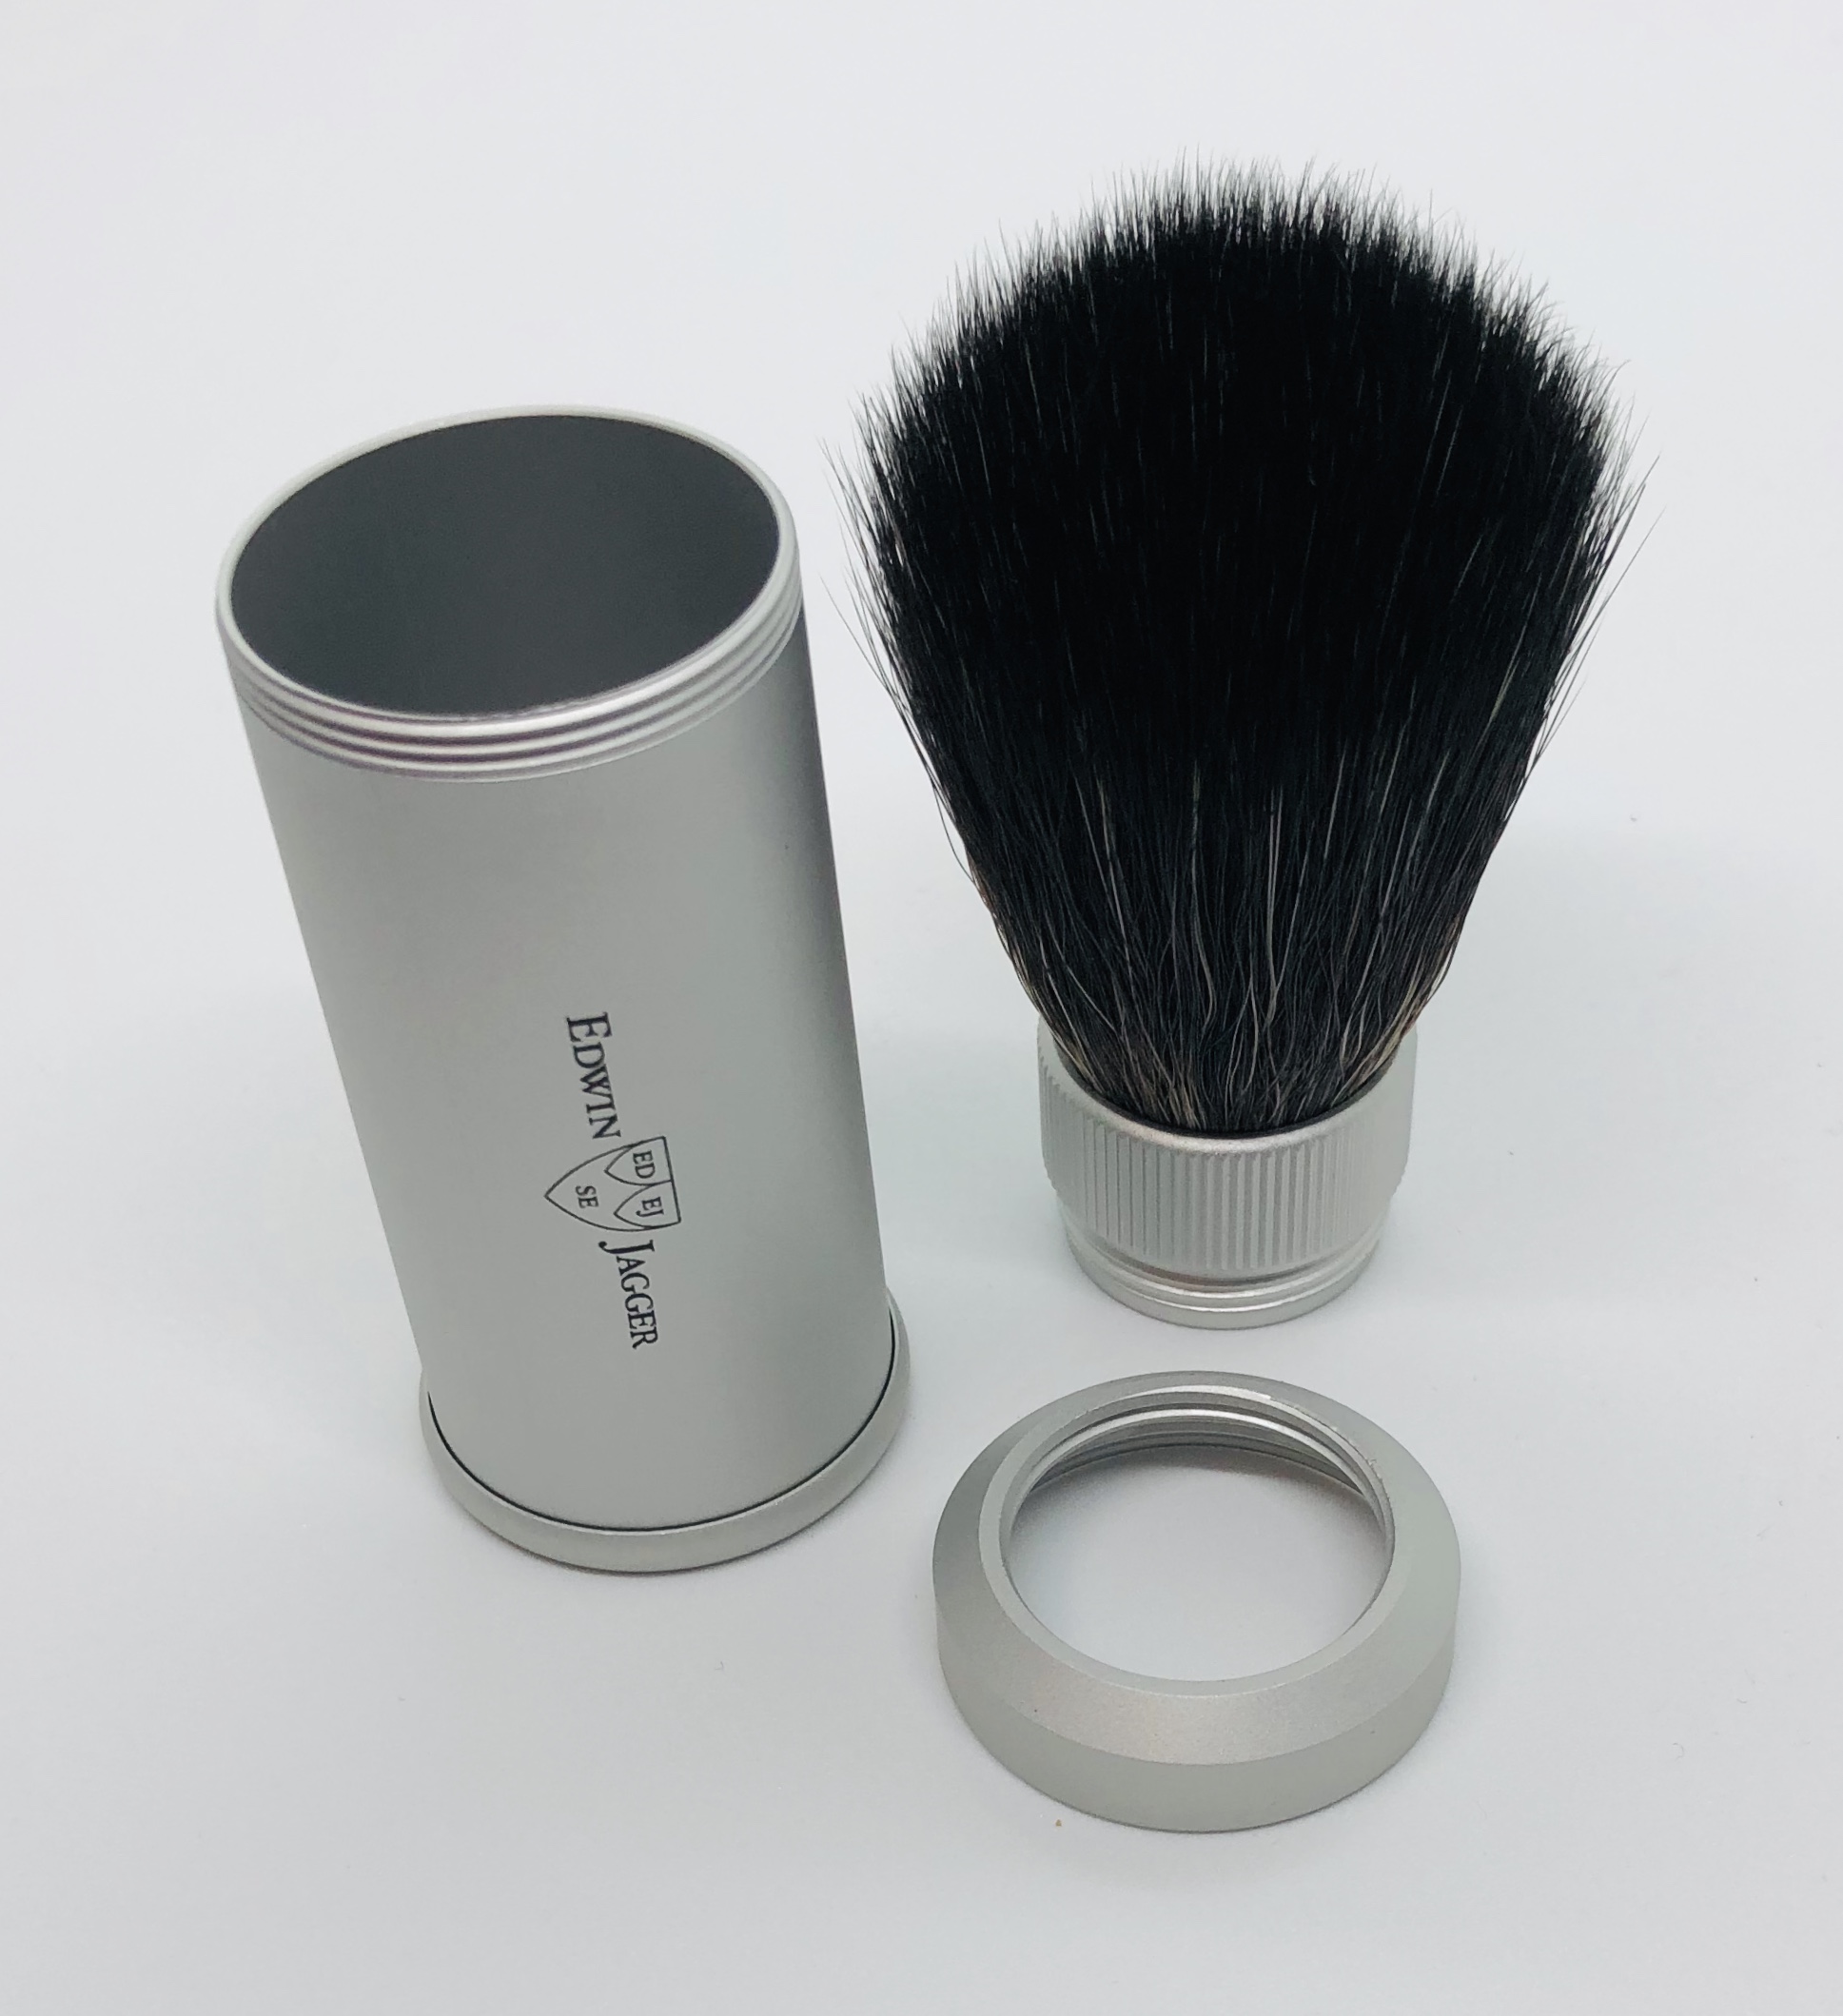 Travel brush edwin jagger silver synthetic